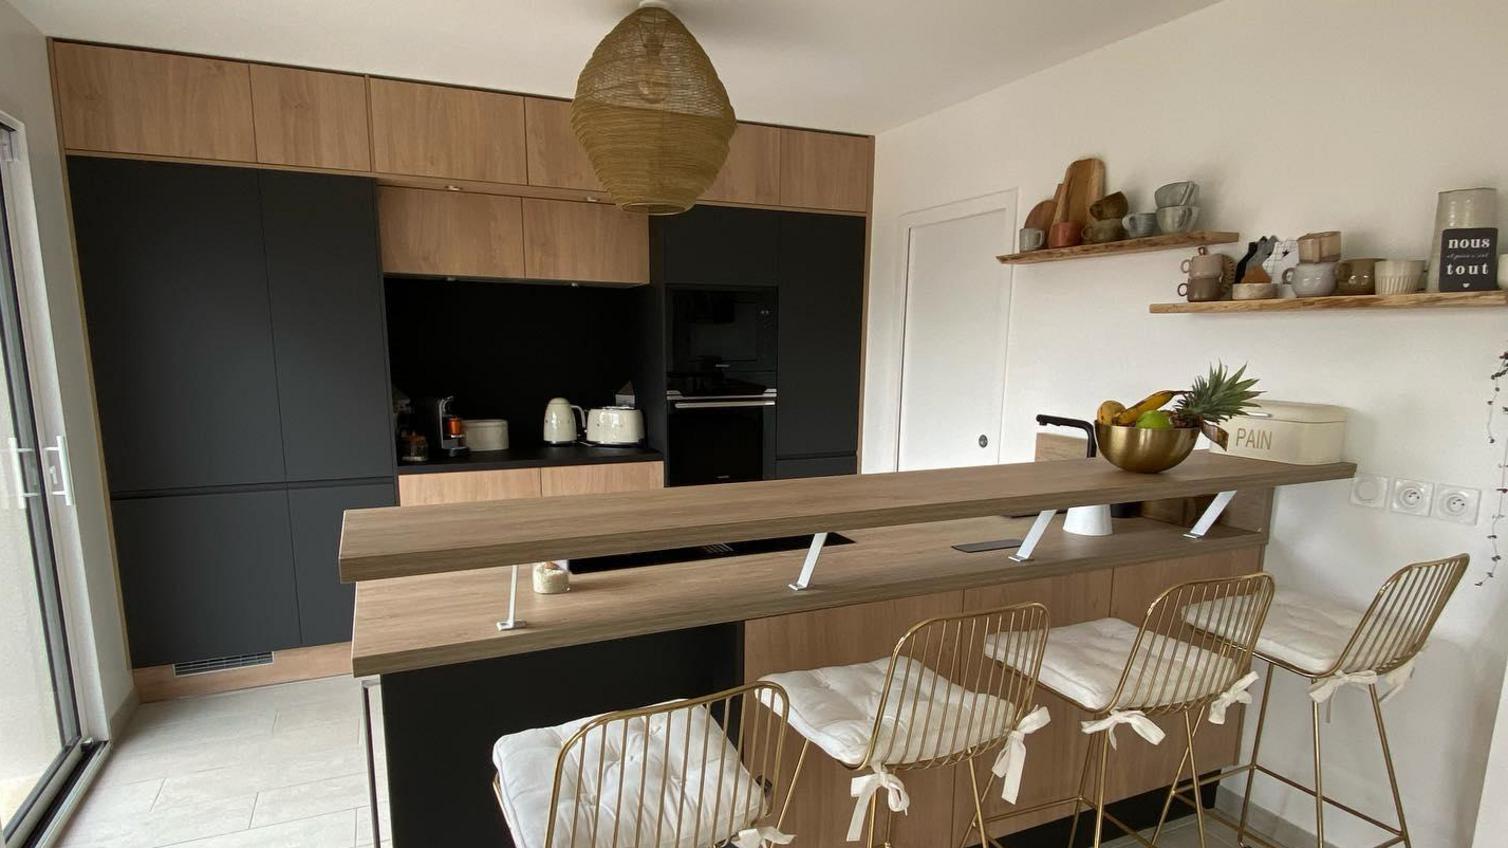 A black integrated handle kitchen with oak units, oak worktops and stone flooring.